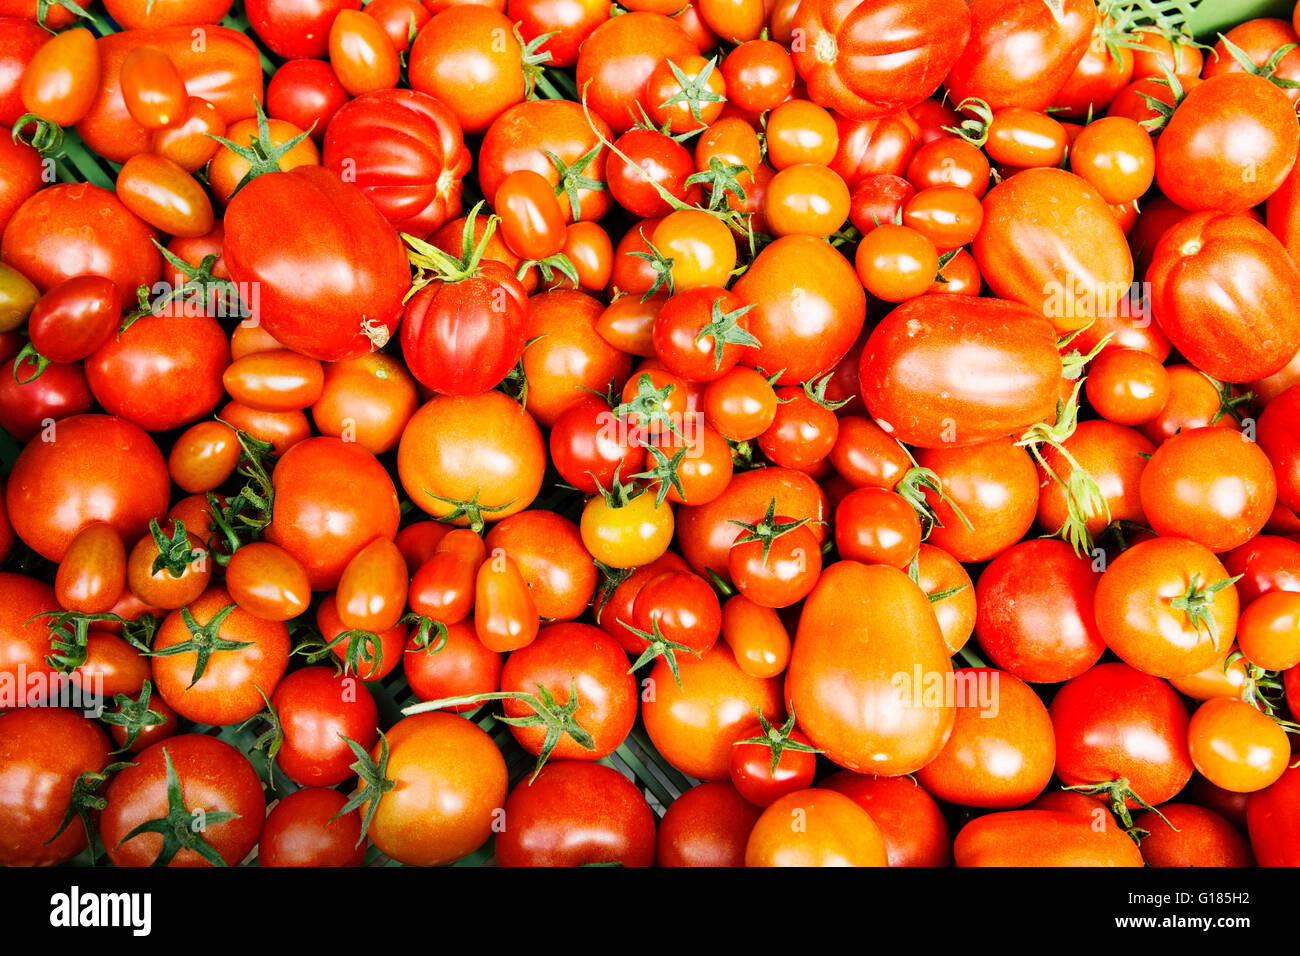 Tomatoes in assorted sizes Stock Photo